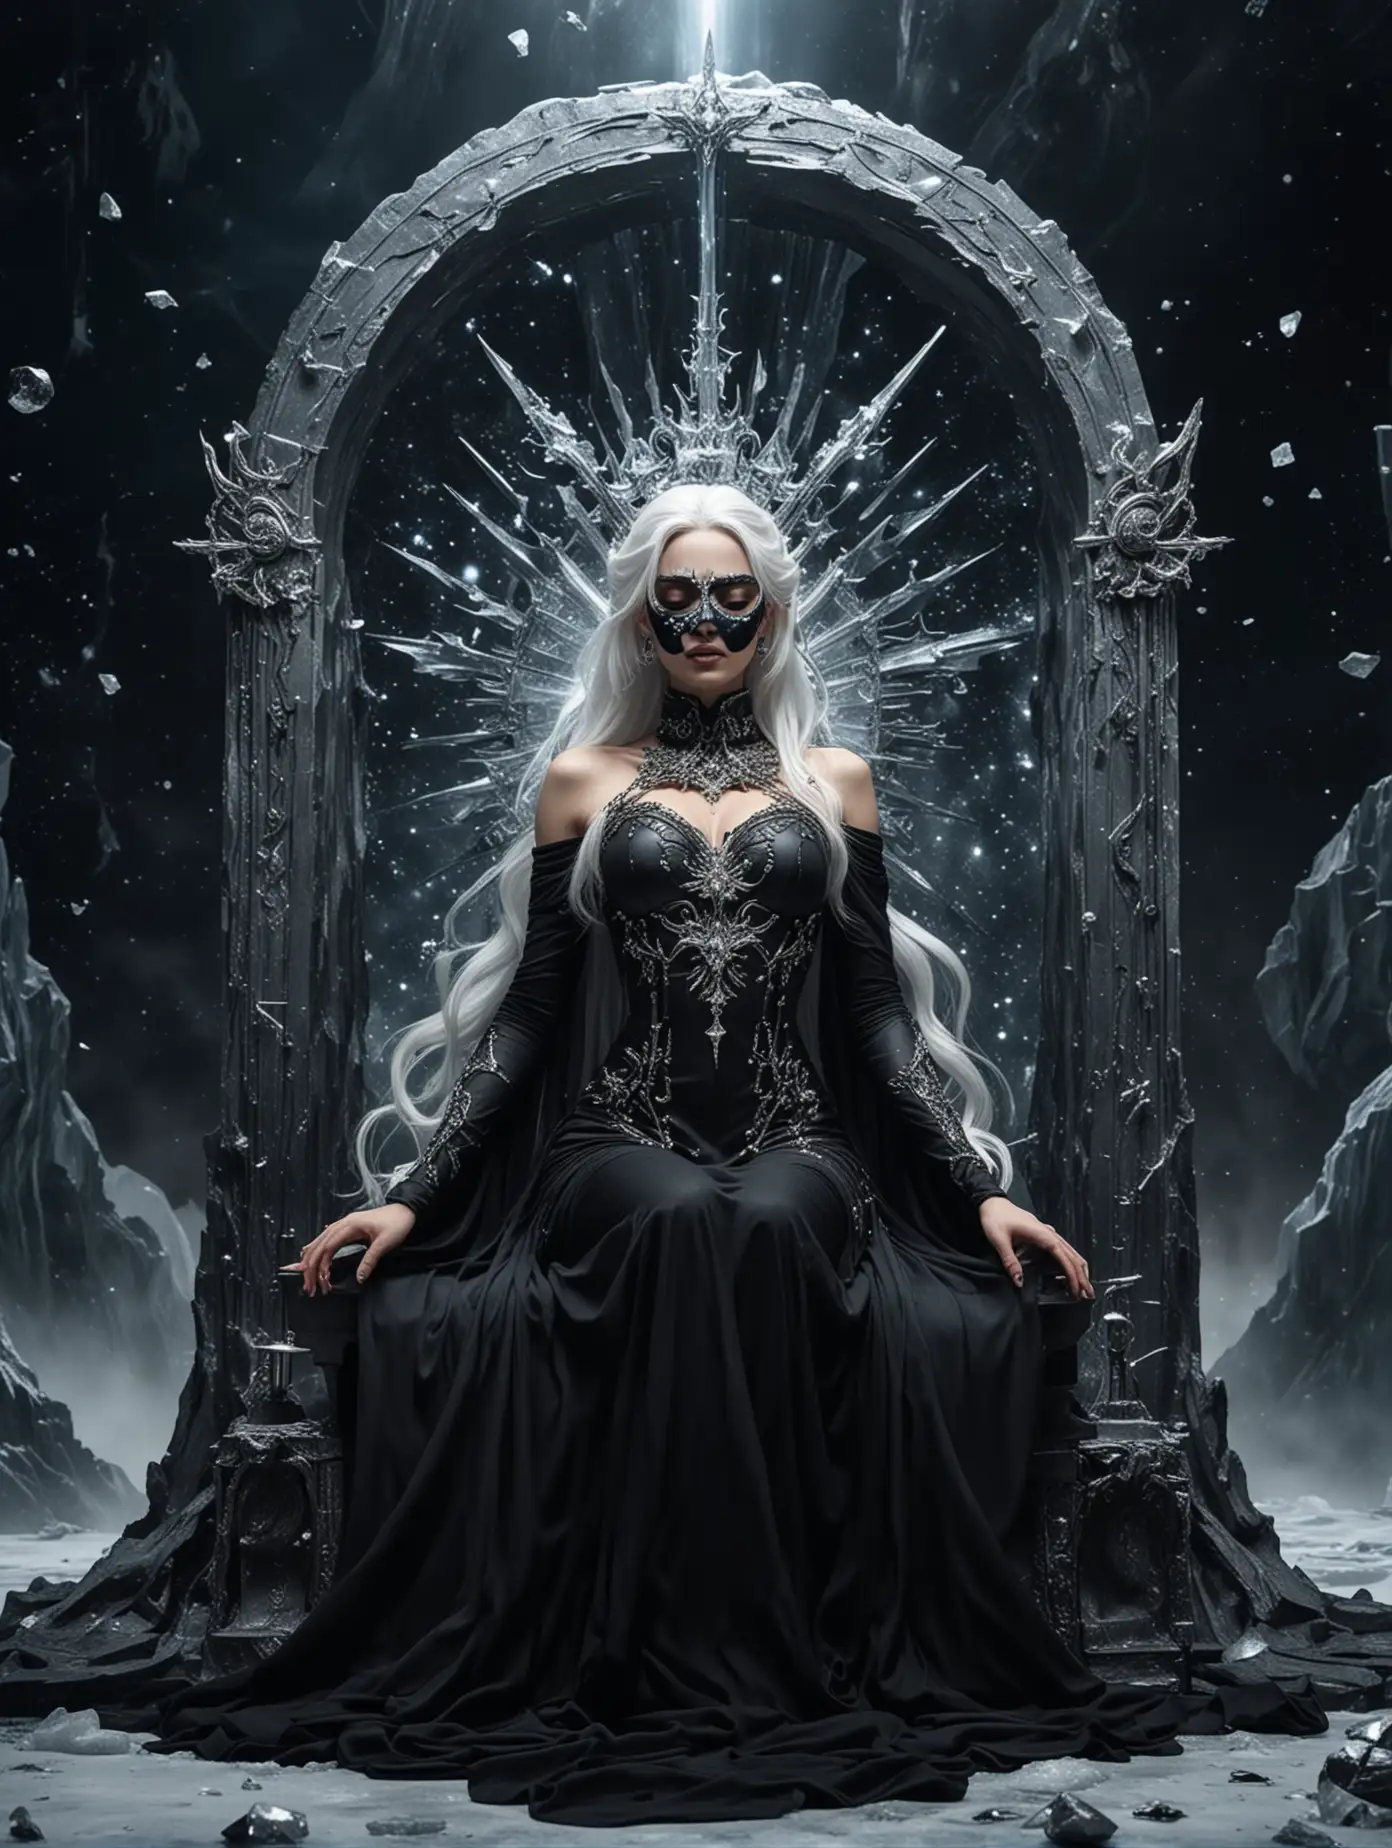 Icy-Goddess-Enthroned-Majestic-WomanGoddess-in-Space-with-Black-Hole-Background